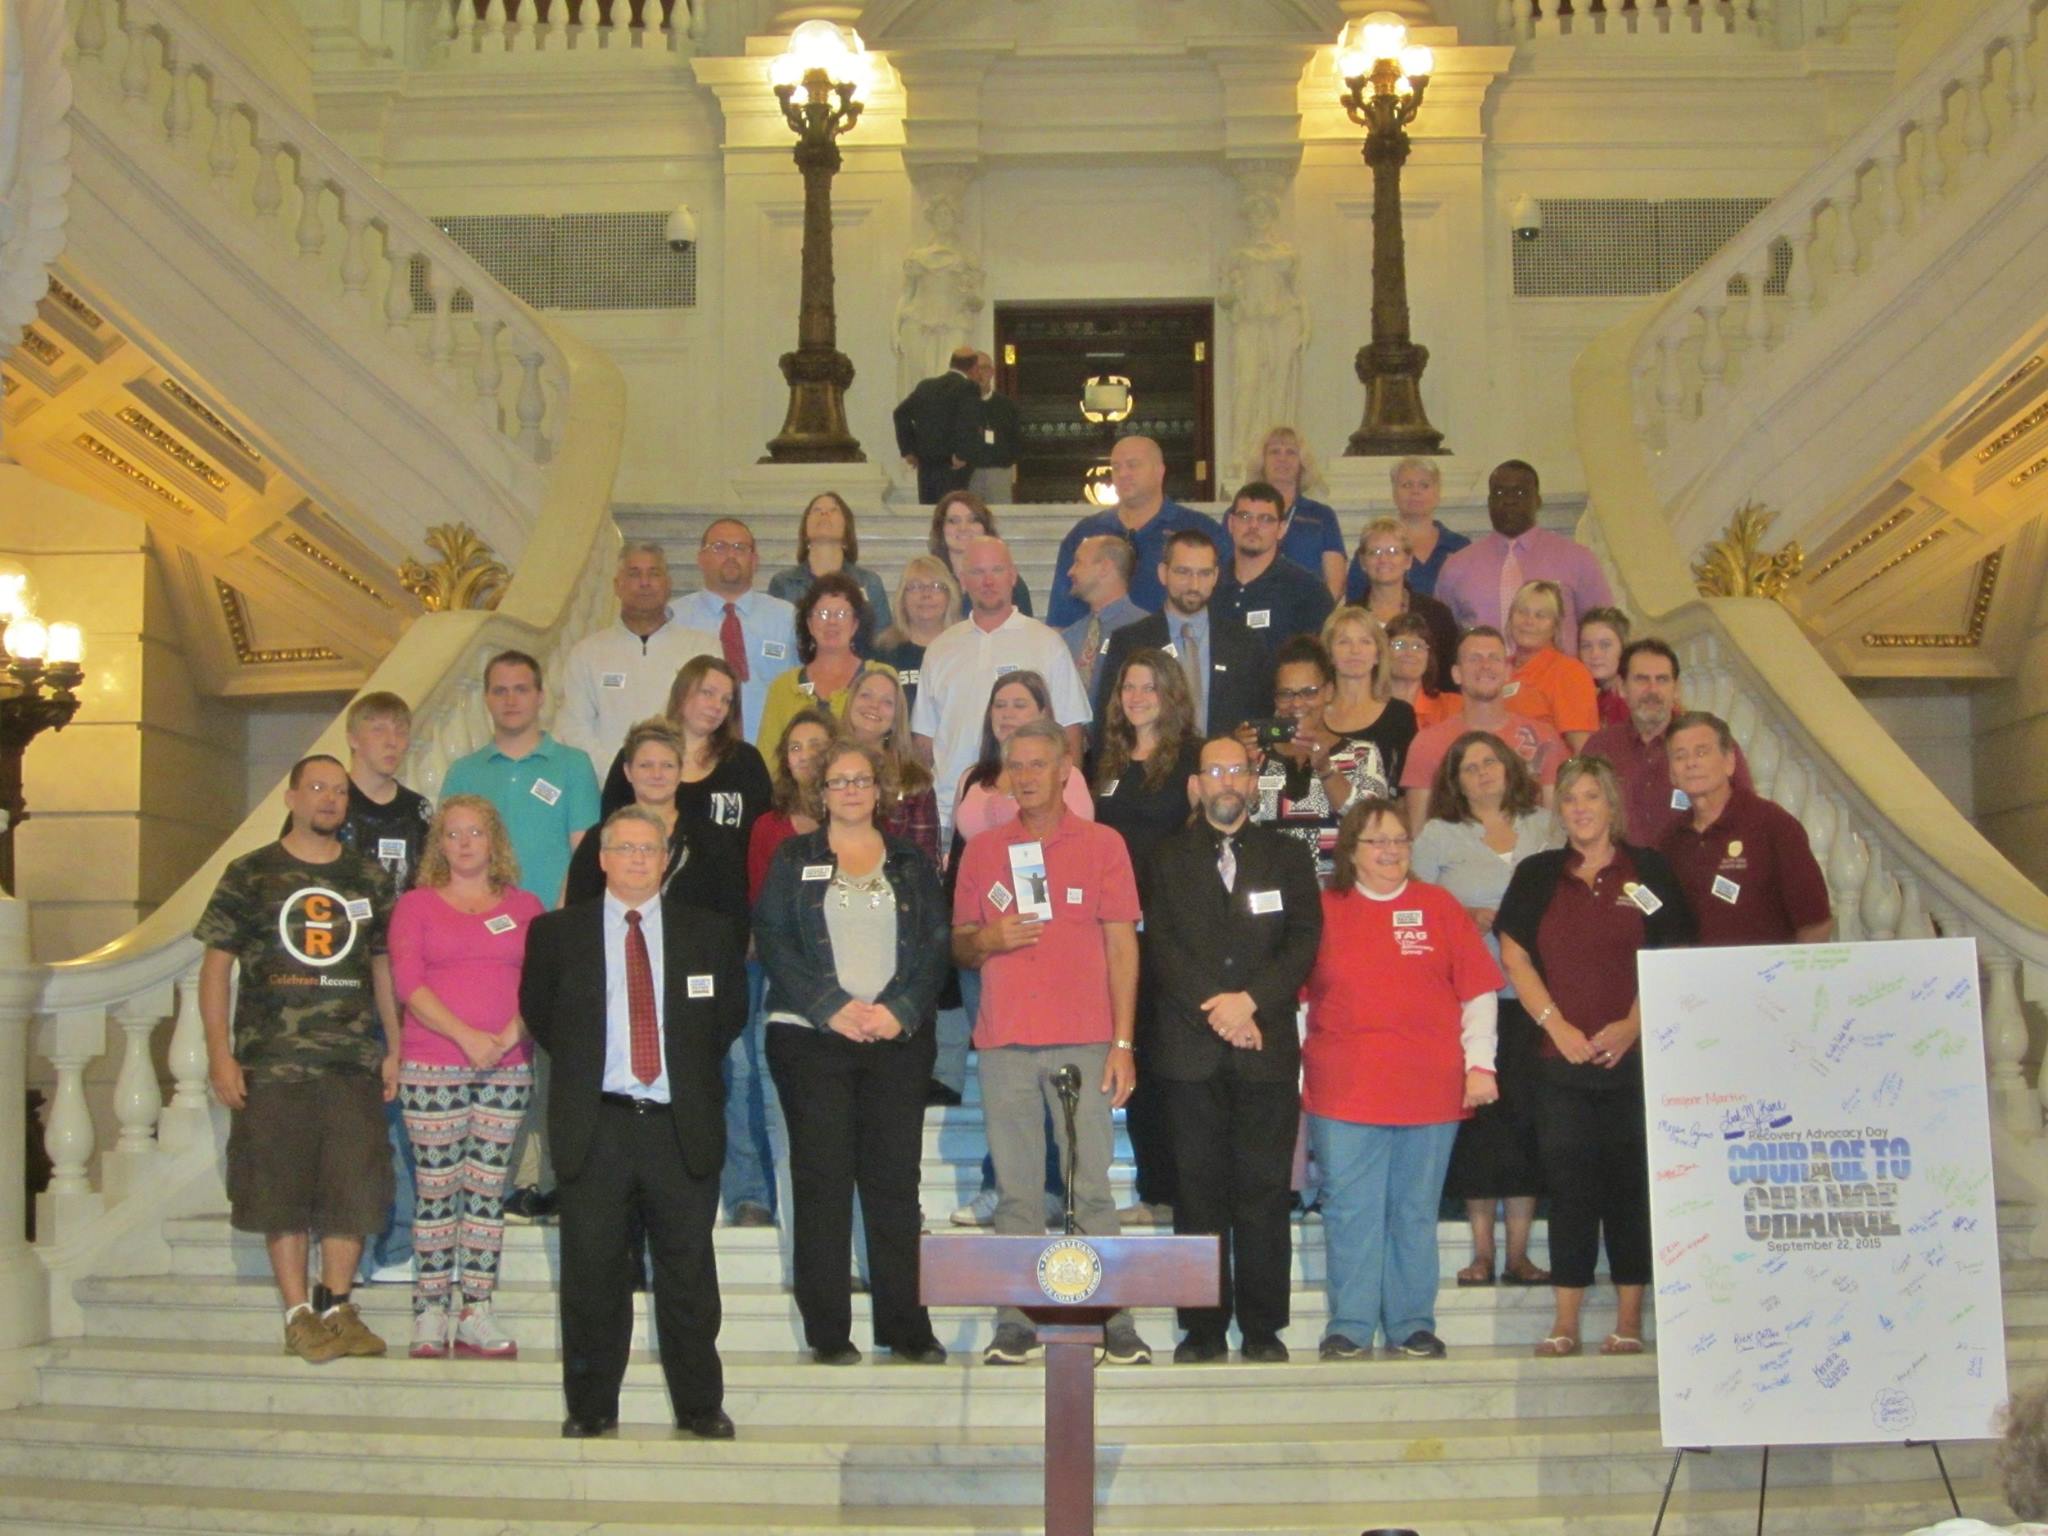 2015 Image at the Capitol